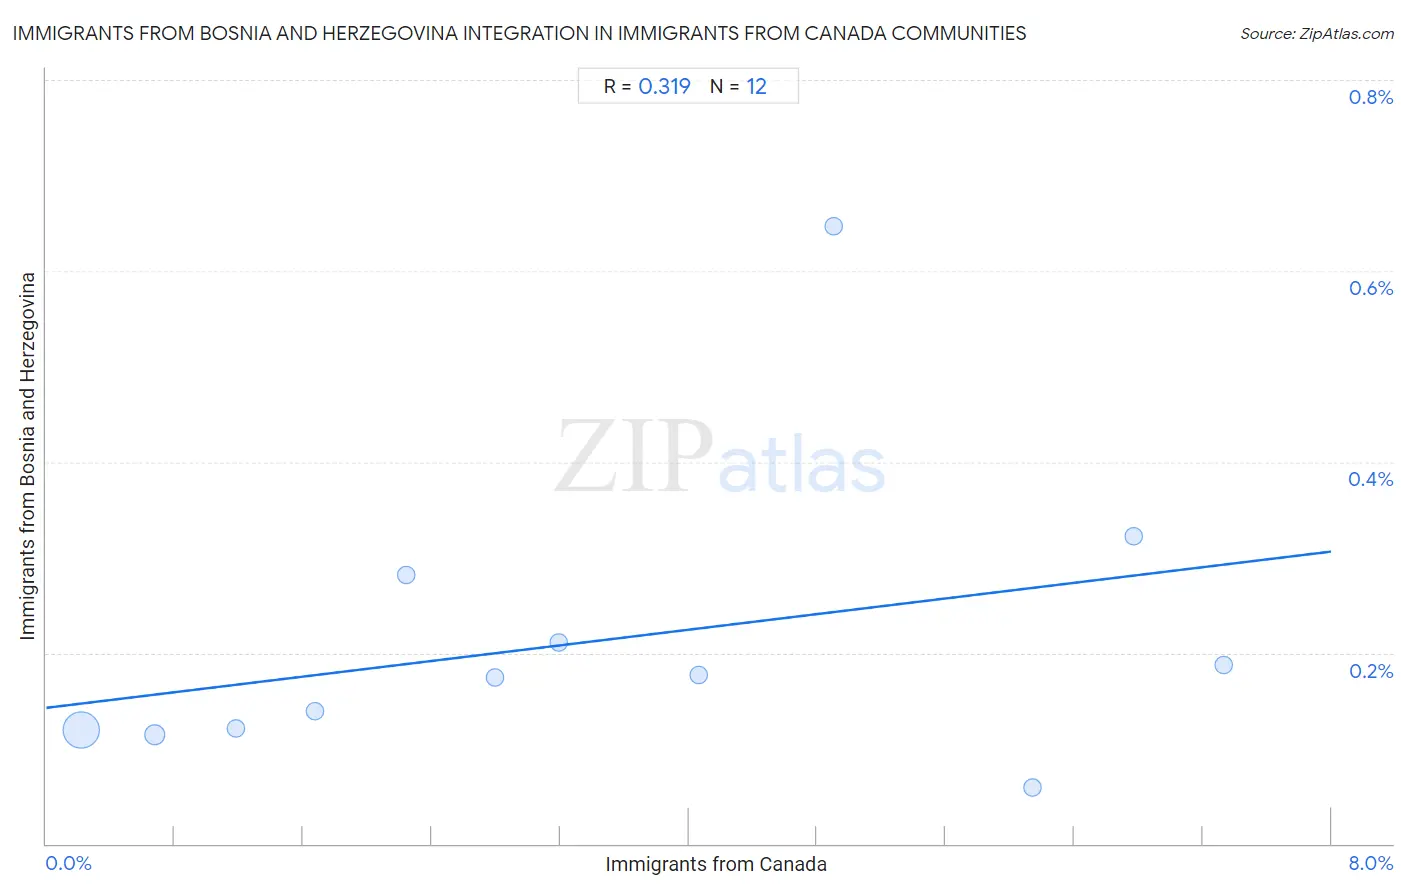 Immigrants from Canada Integration in Immigrants from Bosnia and Herzegovina Communities